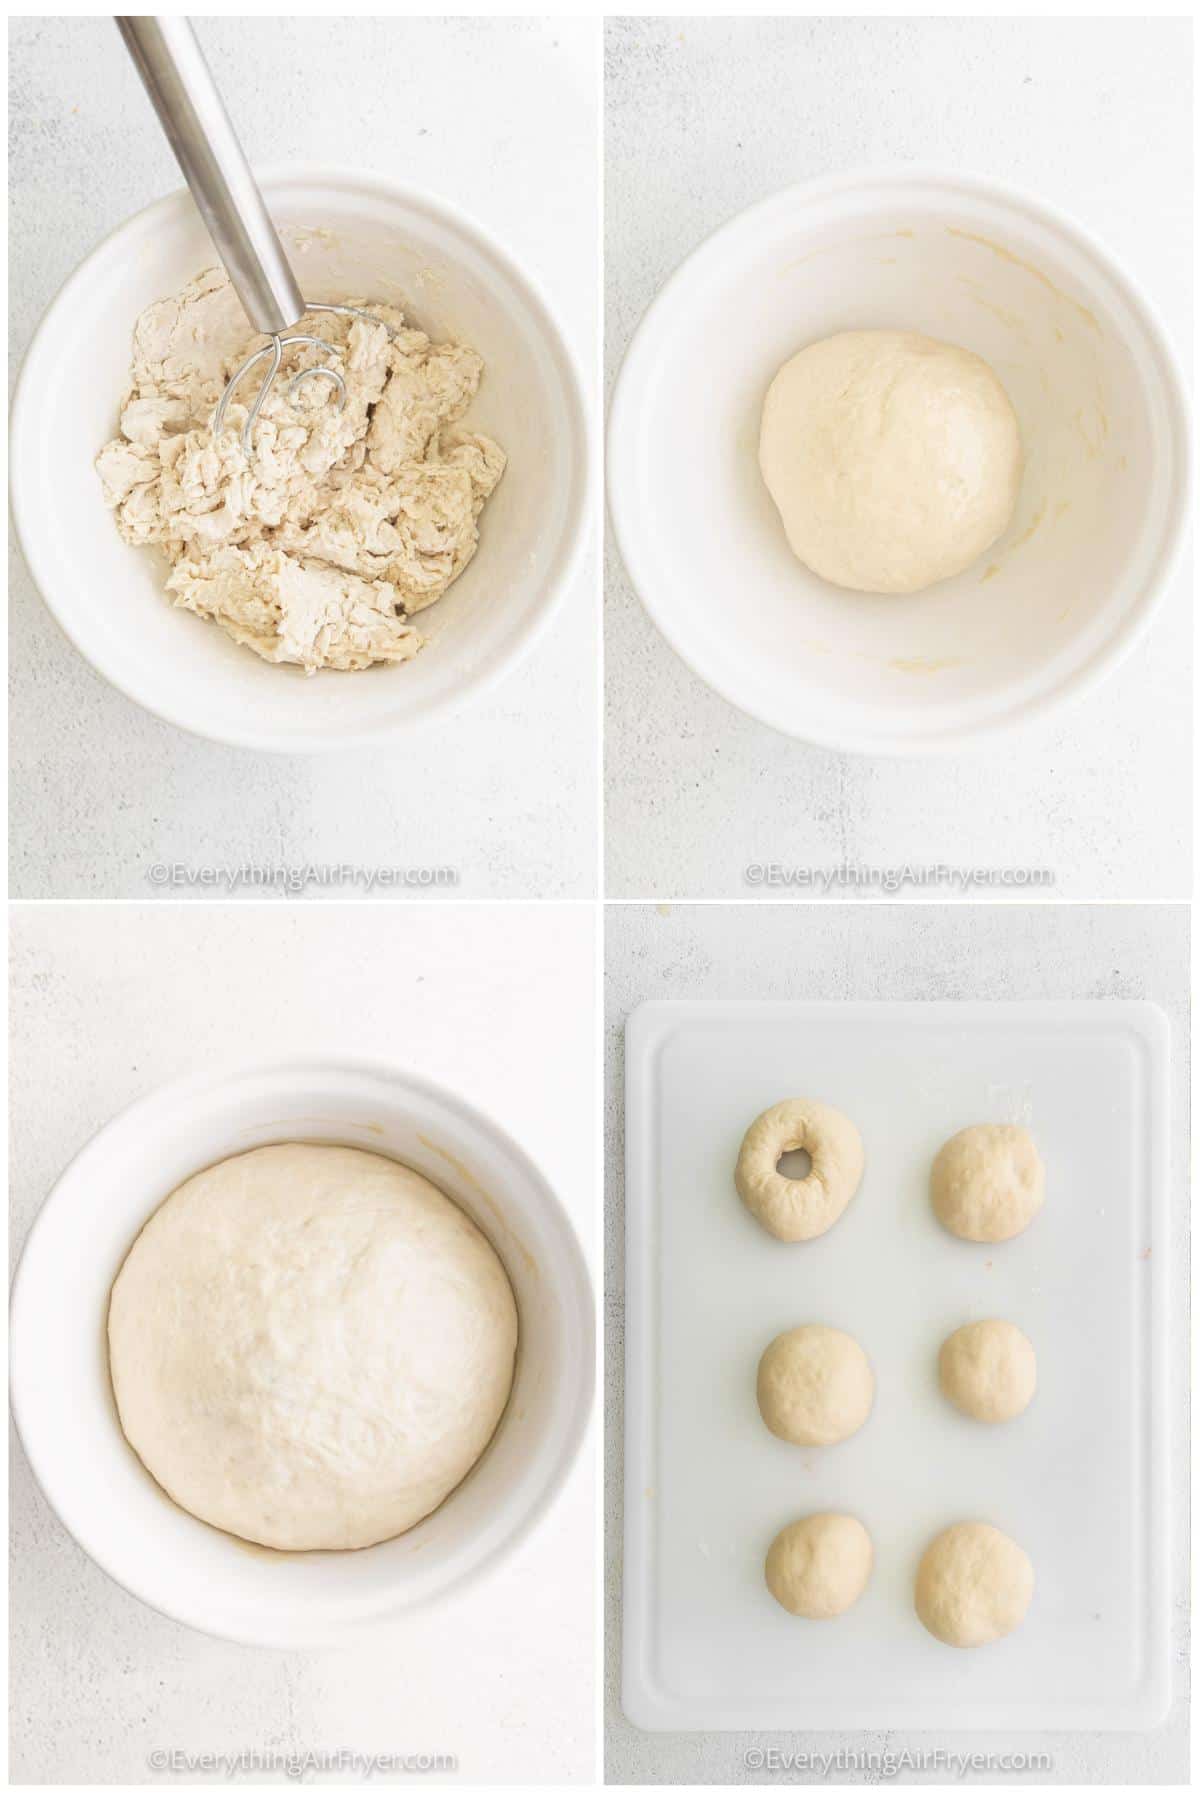 process of mixing ingredients and shaping dough for an Air Fryer Bagel